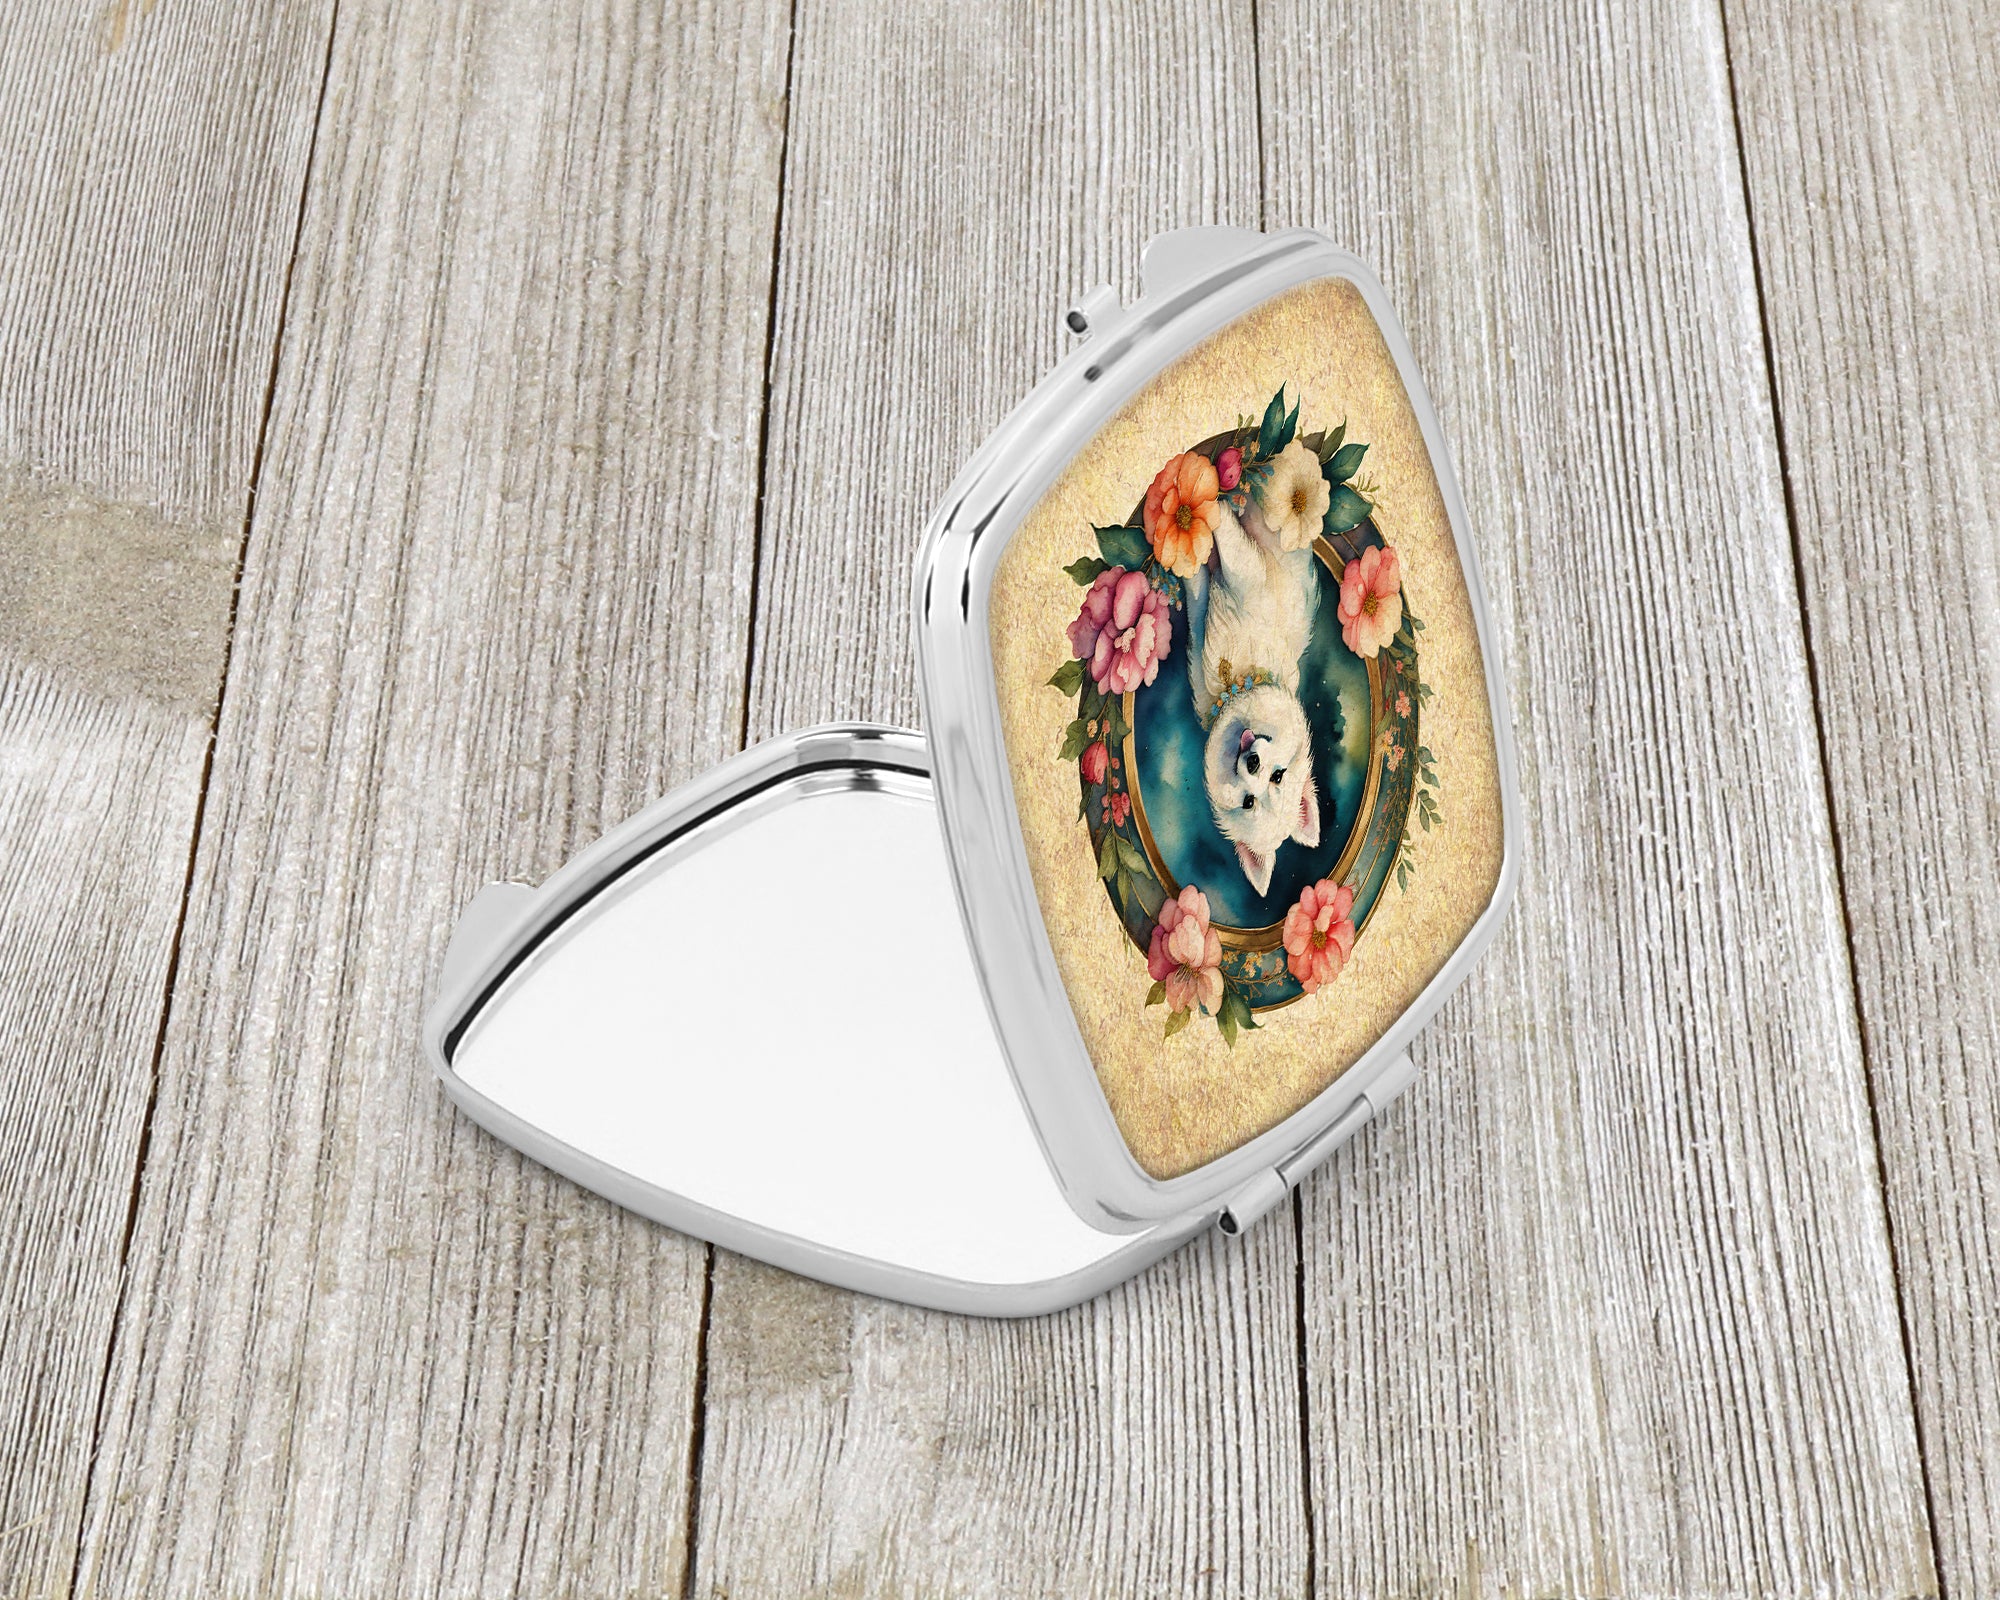 Buy this Japanese Spitz and Flowers Compact Mirror